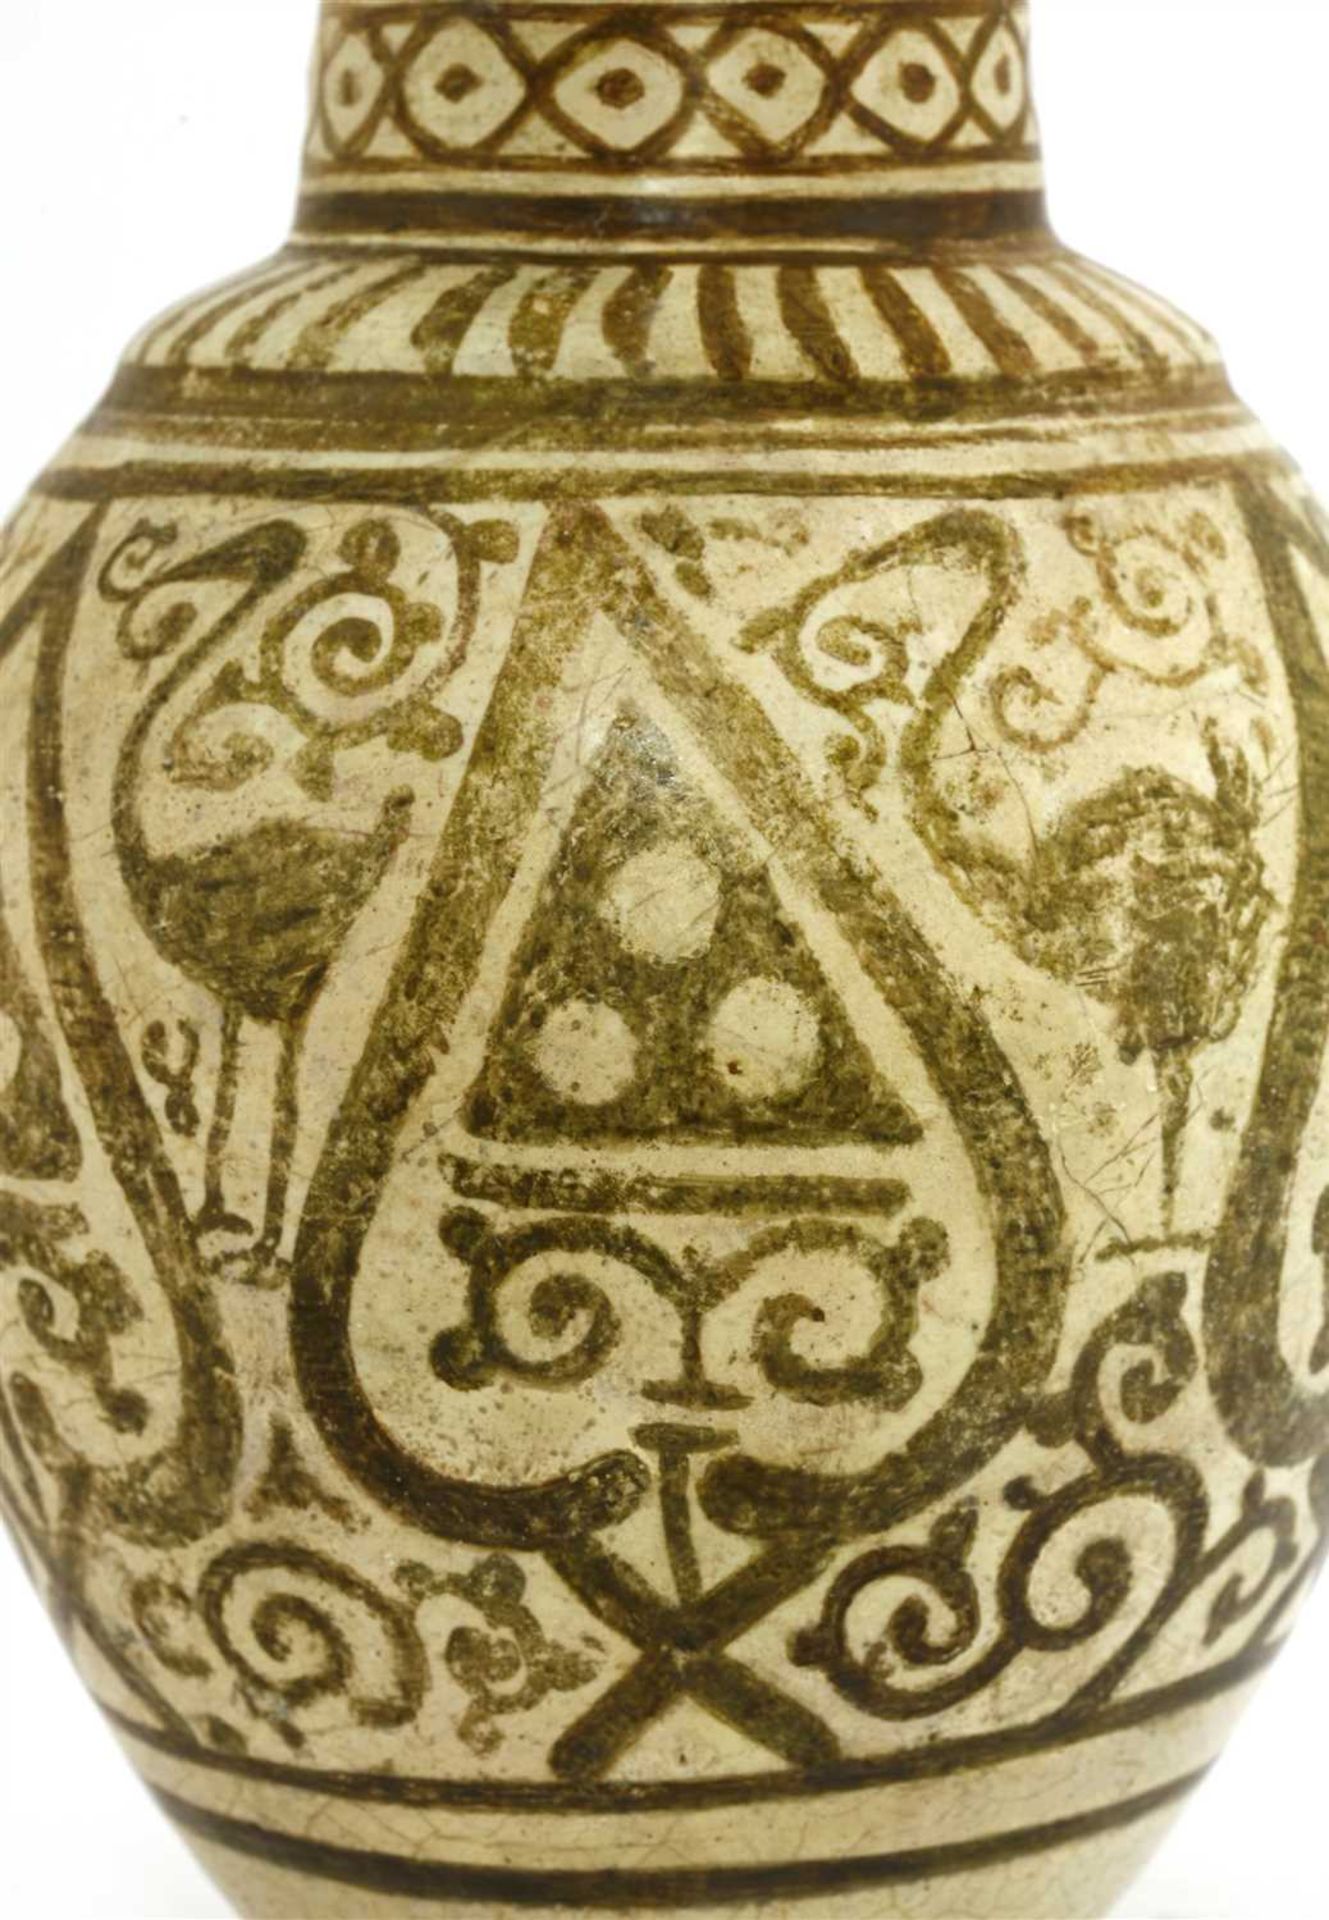 A fragmentary Fatimid lustre pottery jar, - Image 3 of 6